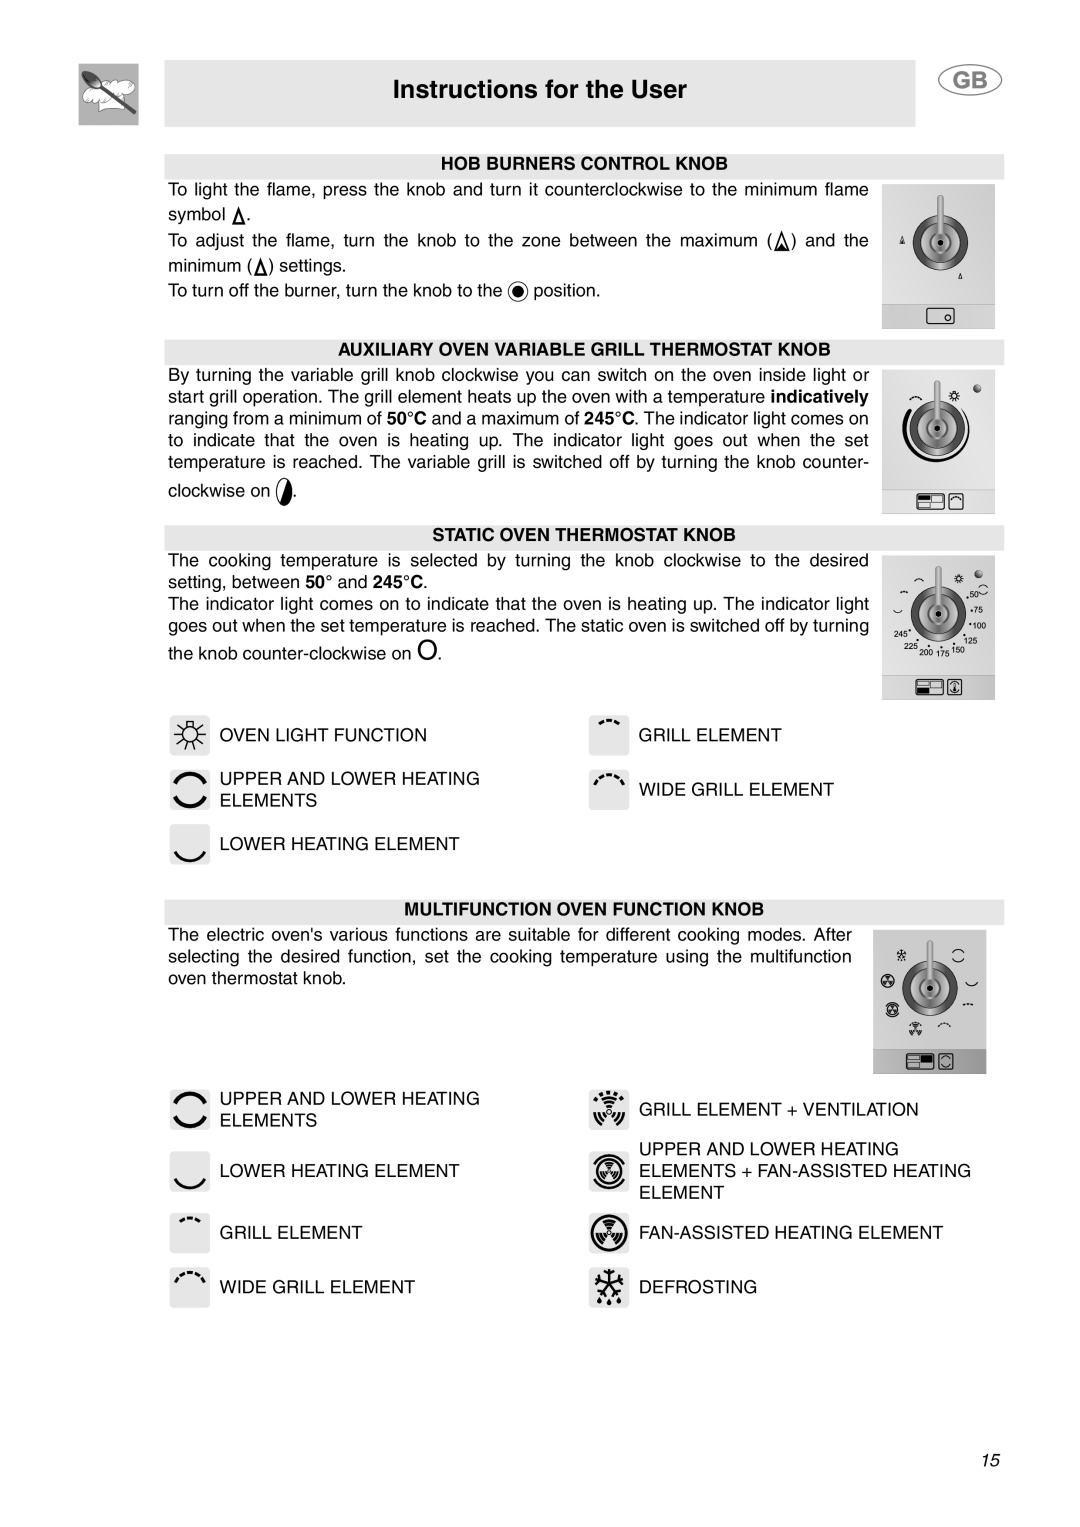 Smeg SY4110 manual Instructions for the User, Hob Burners Control Knob, Auxiliary Oven Variable Grill Thermostat Knob 